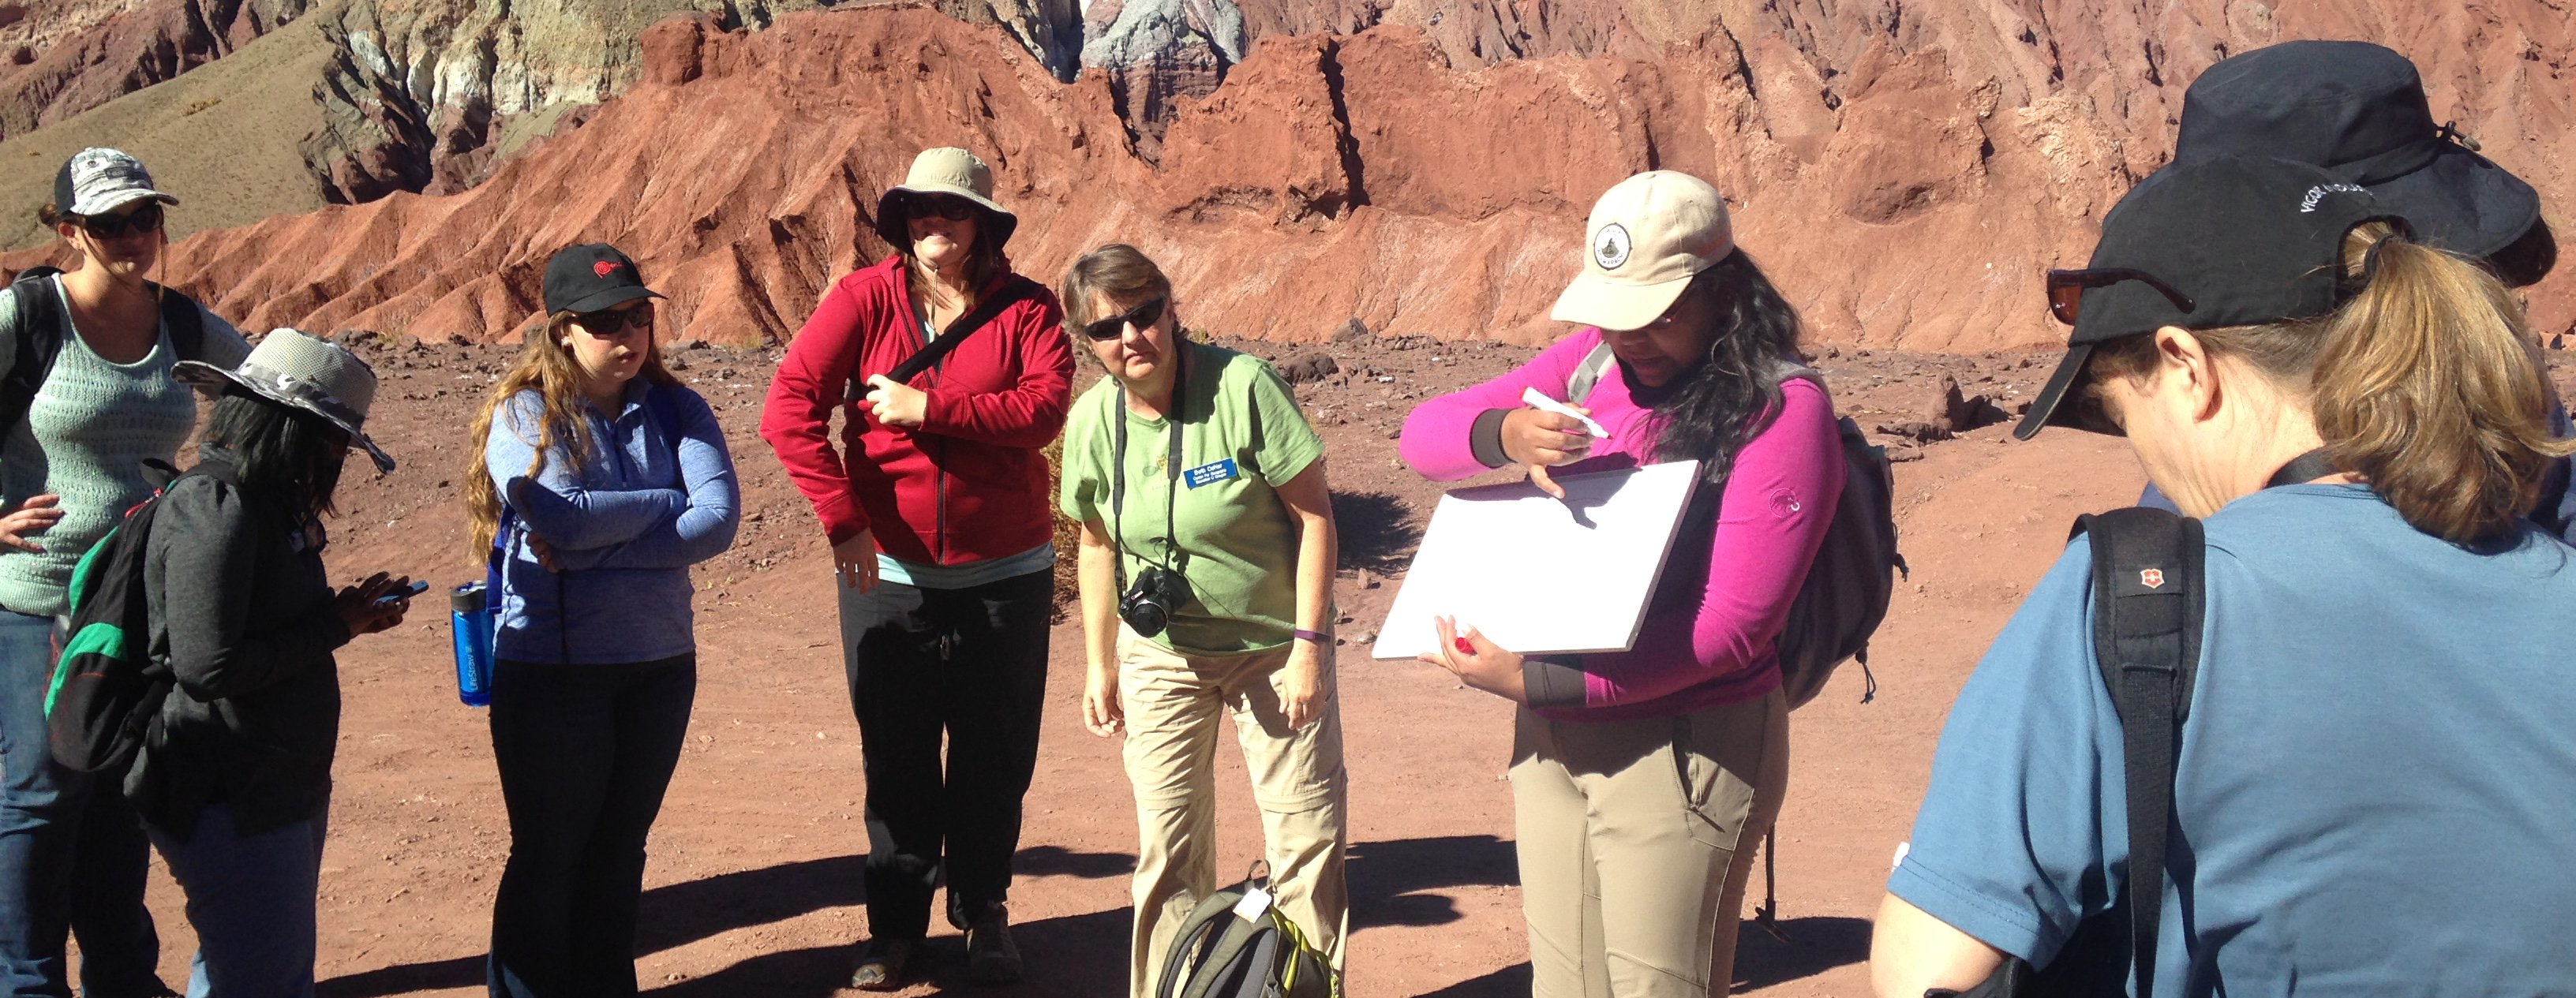 C-GEO Teacher Consultants in Chile listening to a guide, desert mountain backdrop